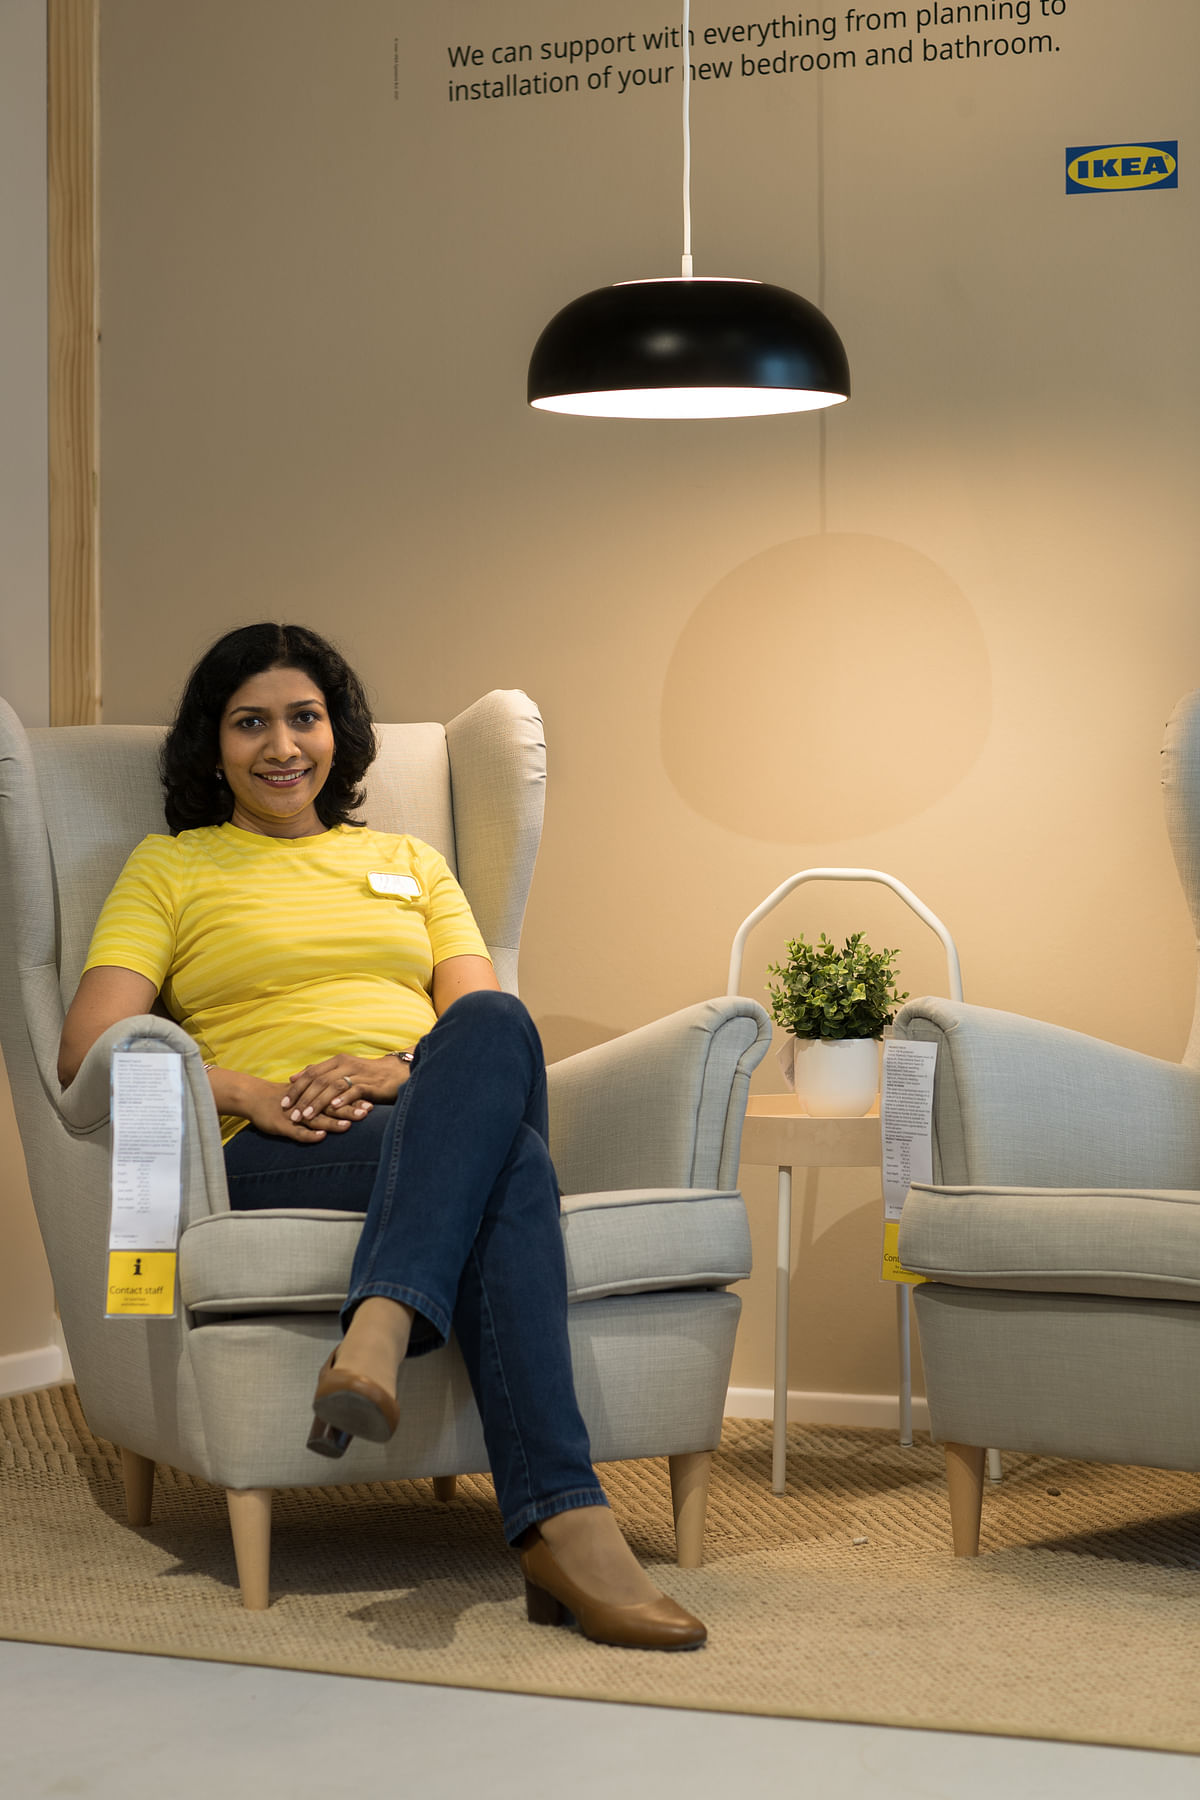 "In research, averages are misleading when it comes to Indian consumers": Kavitha Rao, IKEA